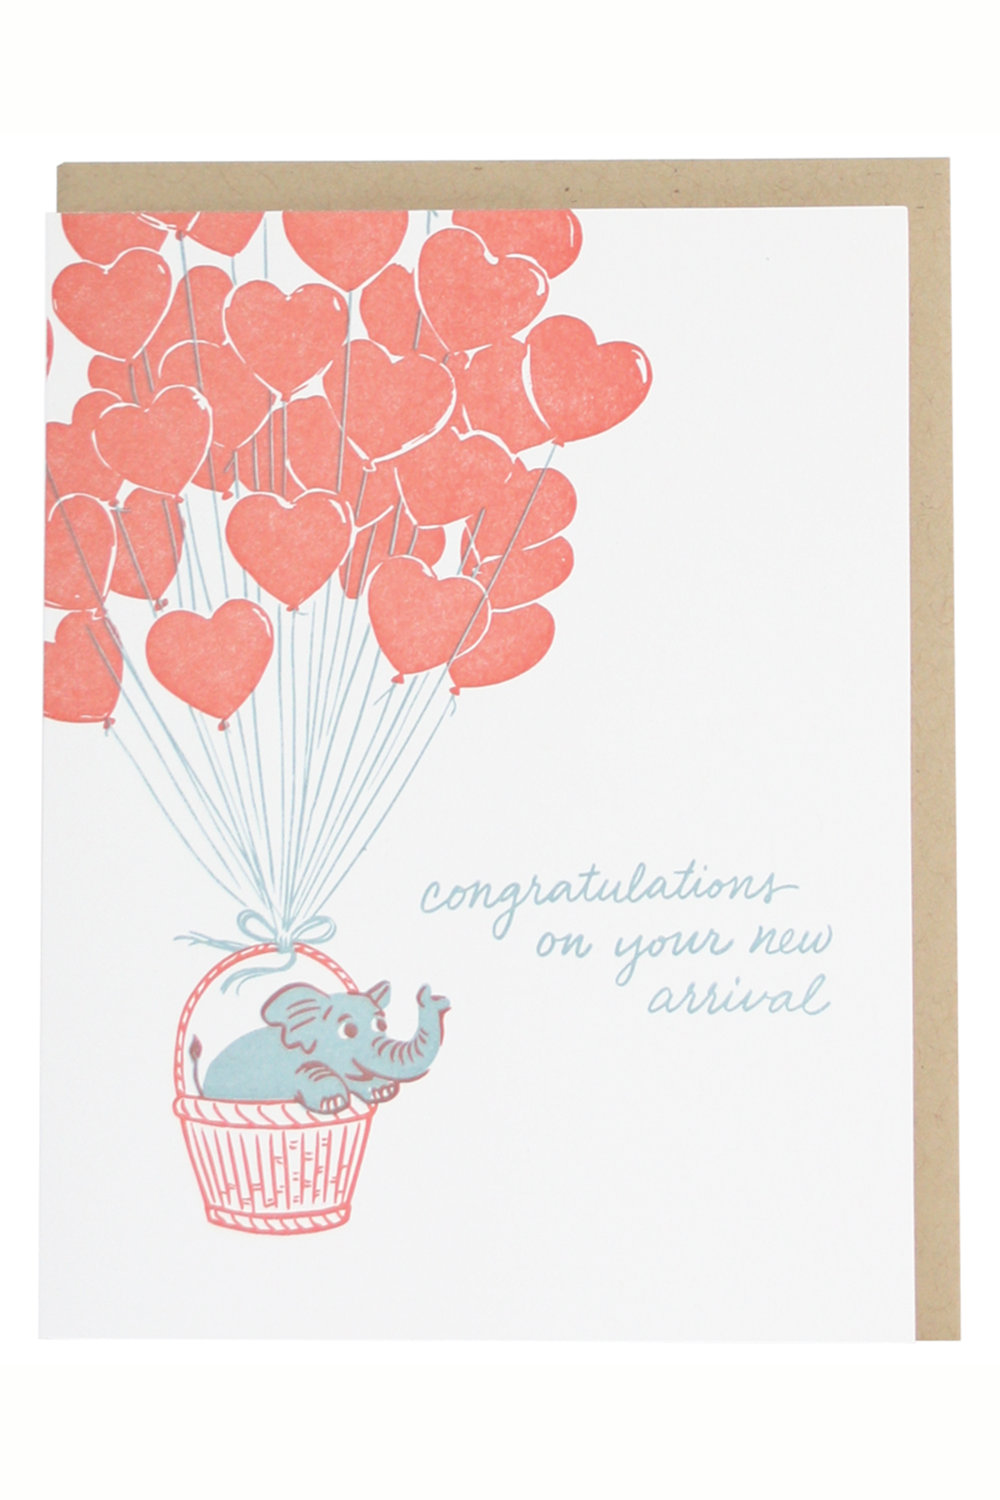 Smudgey Greeting Card - Baby Elephant & Balloons